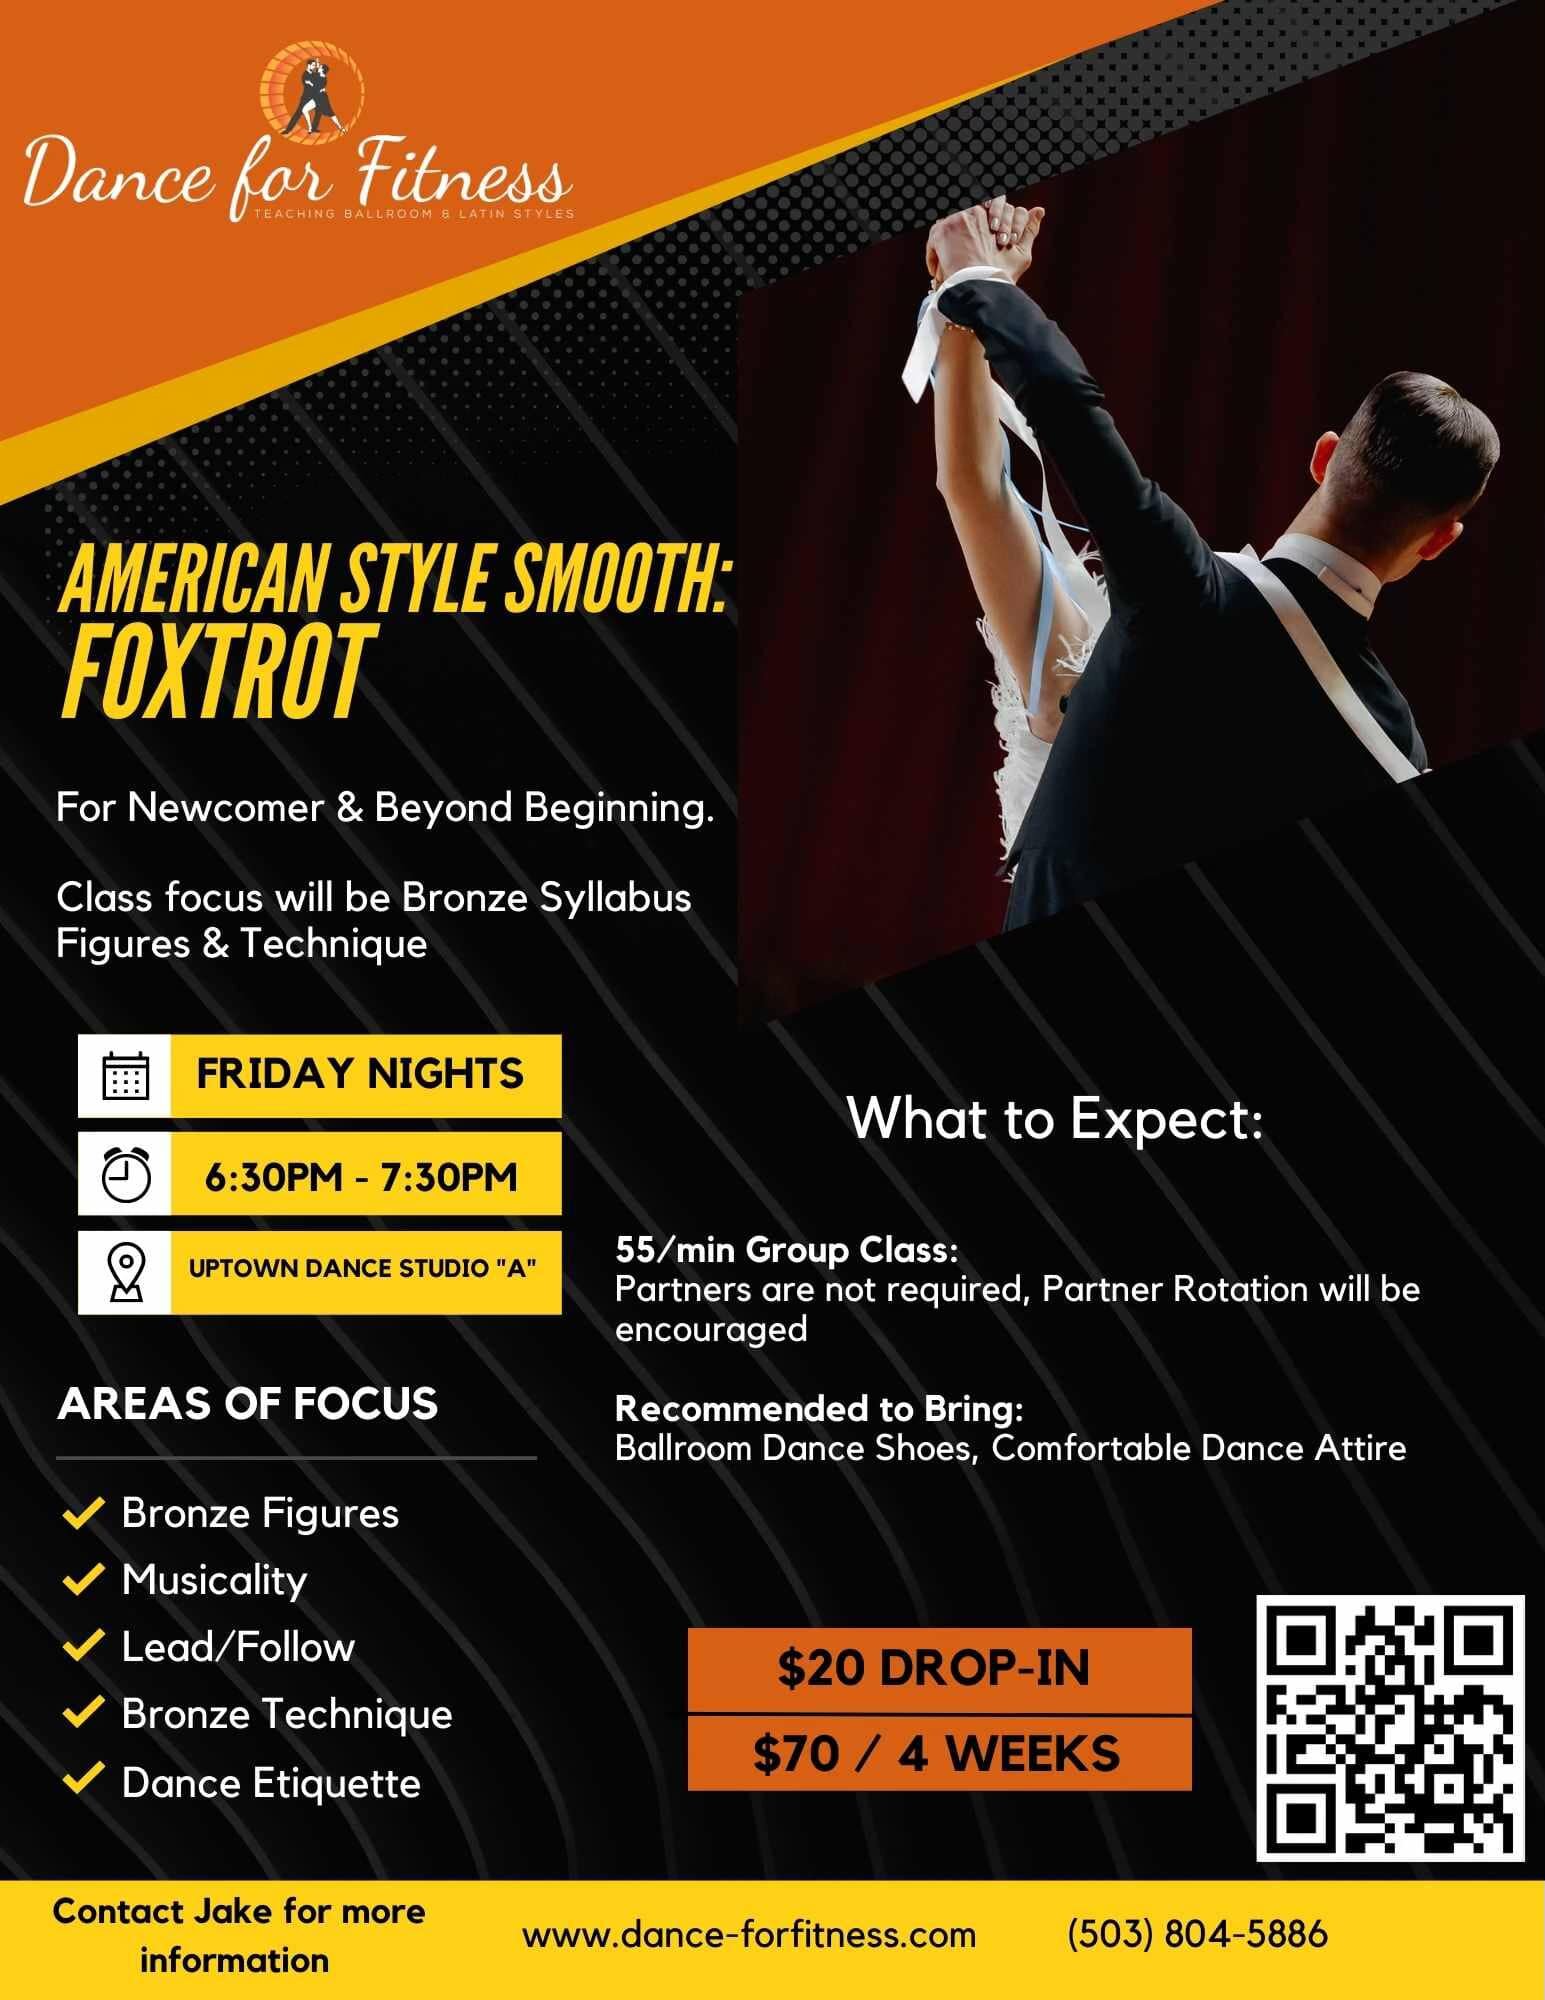 🕺💃 Get ready to put on your dancing shoes and join us for an exciting American smooth foxtrot class tomorrow night at 6:30pm! 🌟 Whether you're a complete beginner or looking to brush up on your dance moves, this class is perfect for you.

🎵 The A